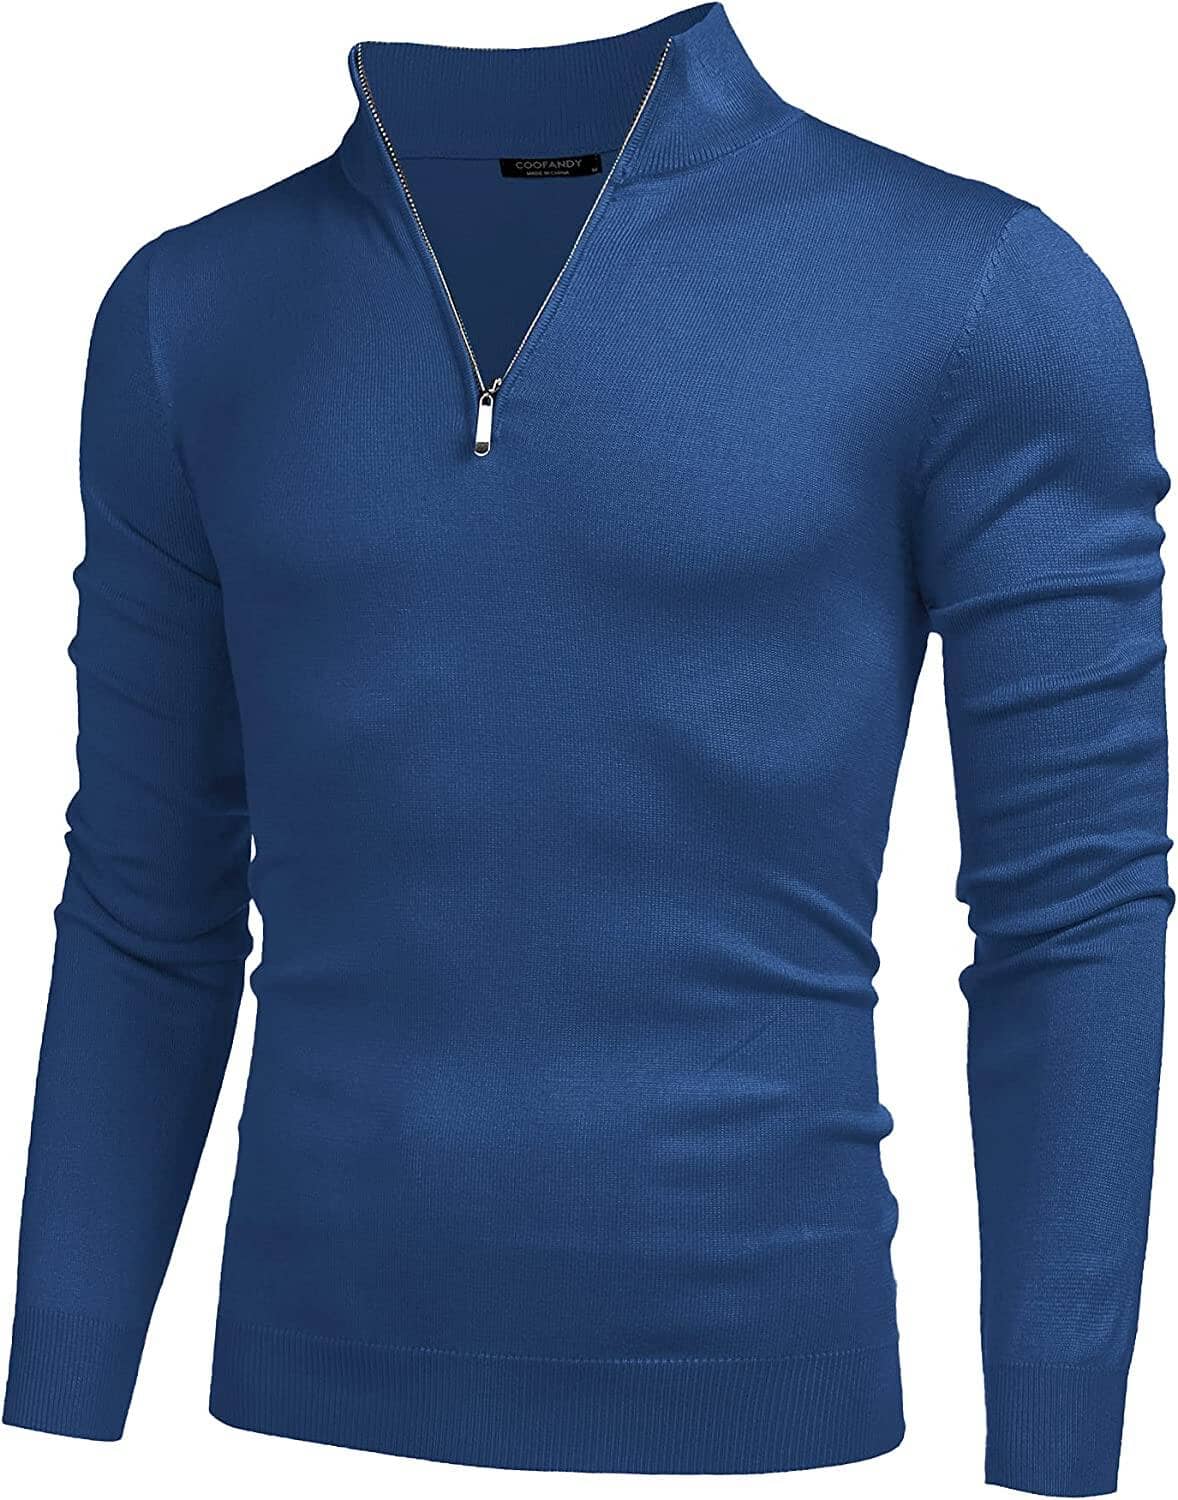 Zip Up Slim Fit Lightweight Pullover Polo Sweater (US Only) Fashion Hoodies & Sweatshirts COOFANDY Store Dark Blue S 